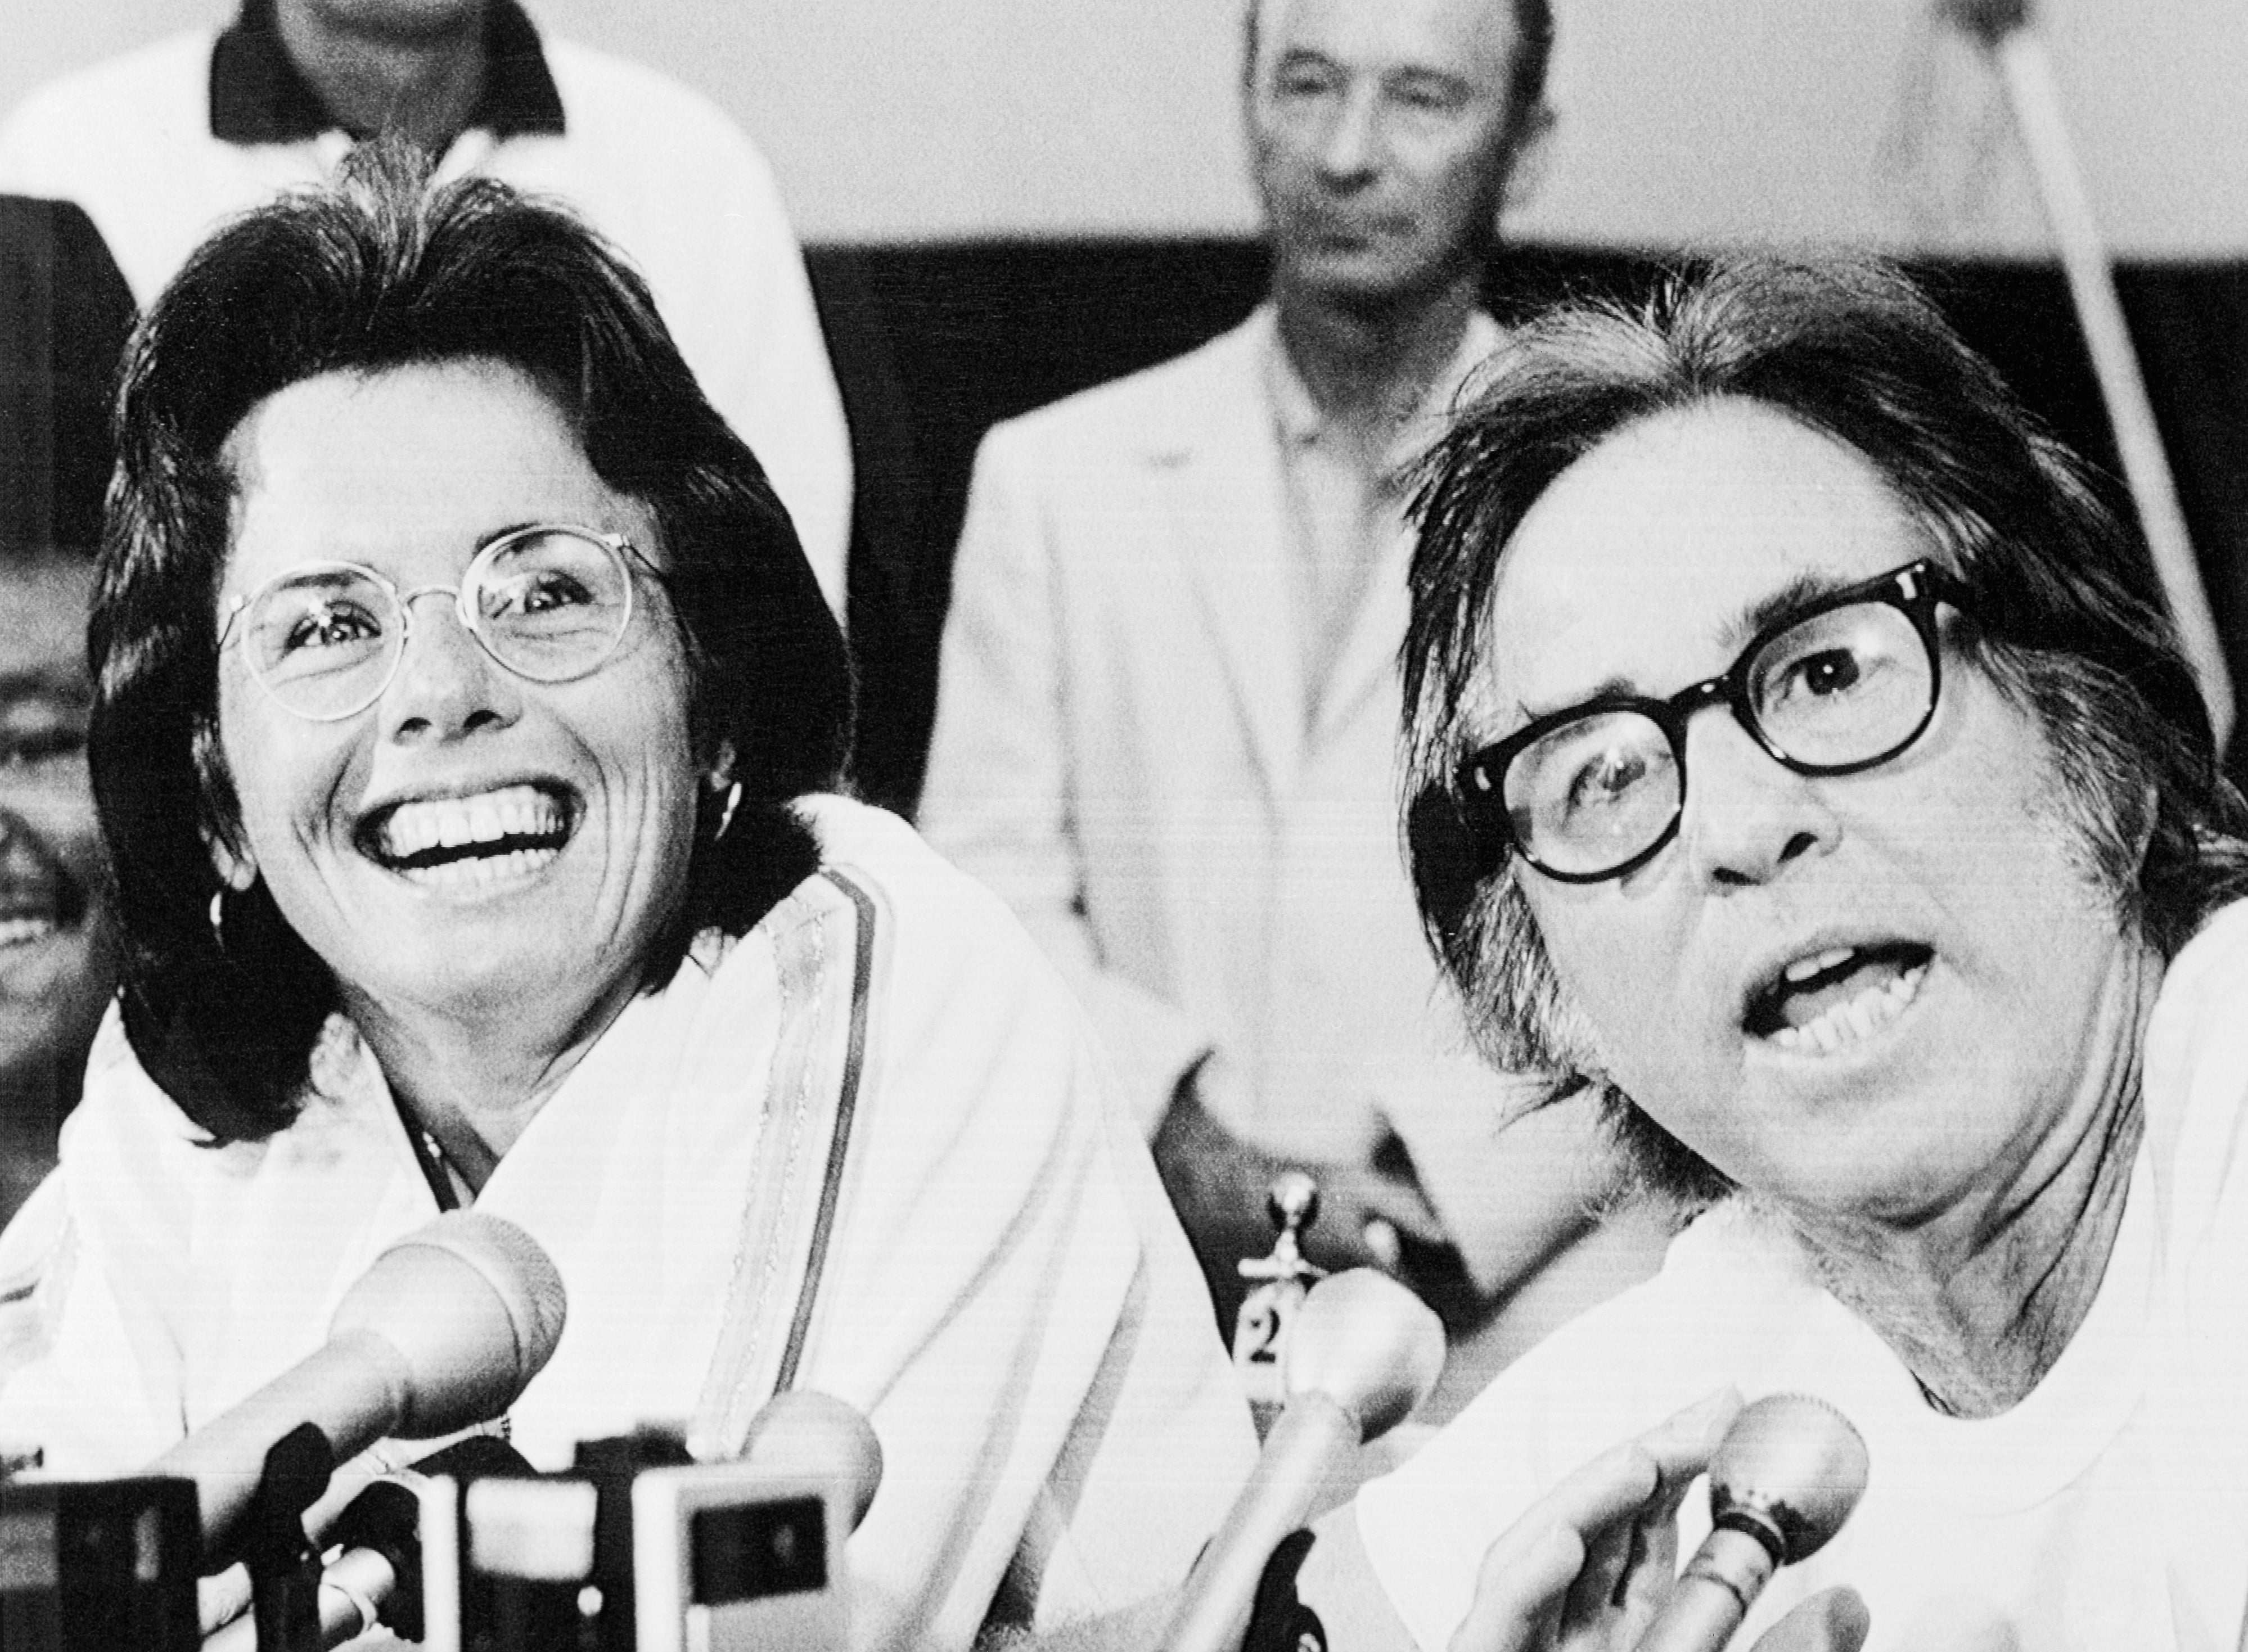 Battle of the Sexes Movie vs the True Story of Billie Jean King